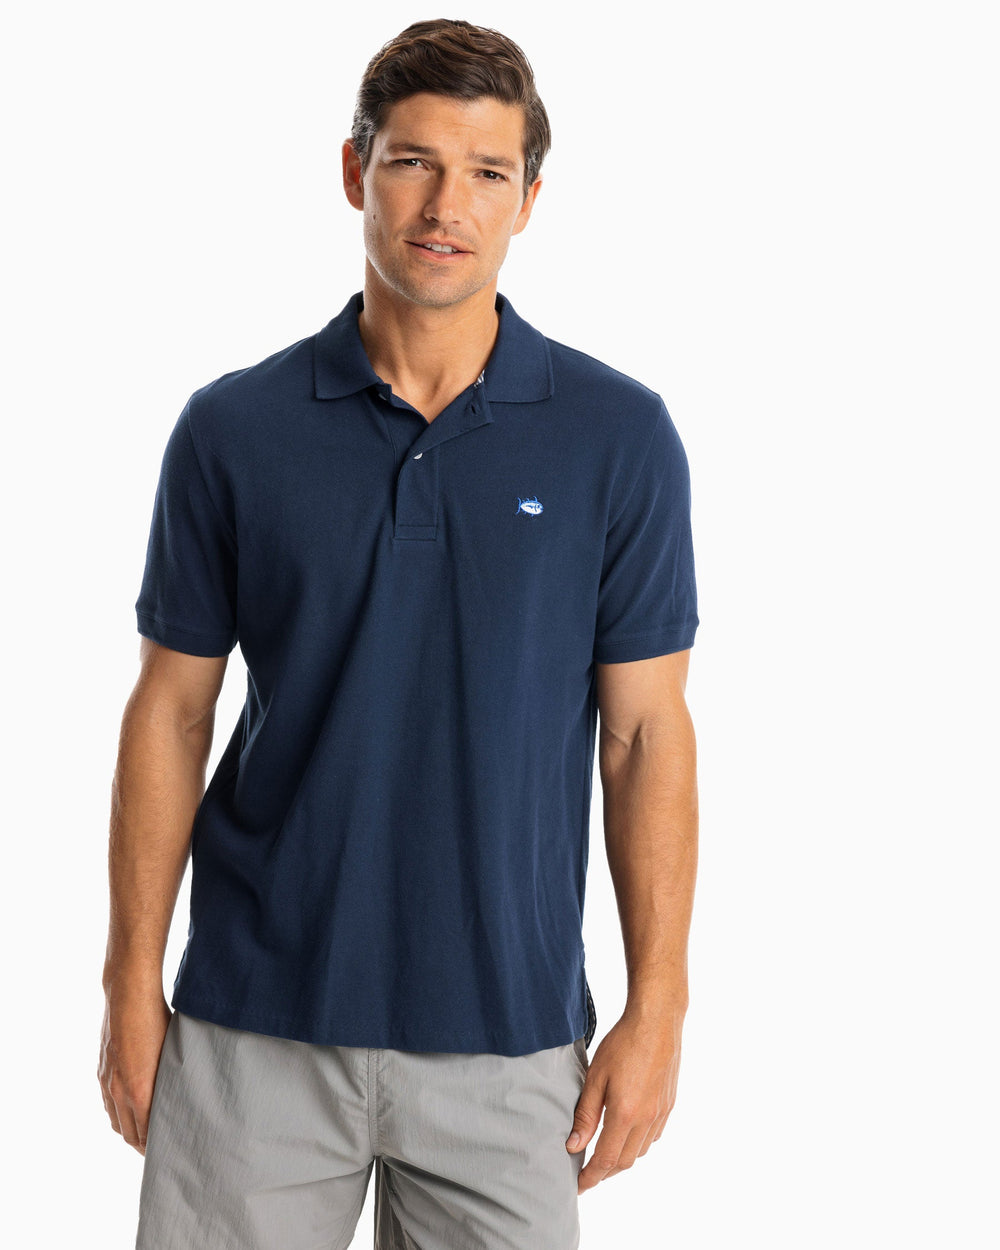 The model front view of the Men's New Skipjack Polo Shirt by Southern Tide - True Navy